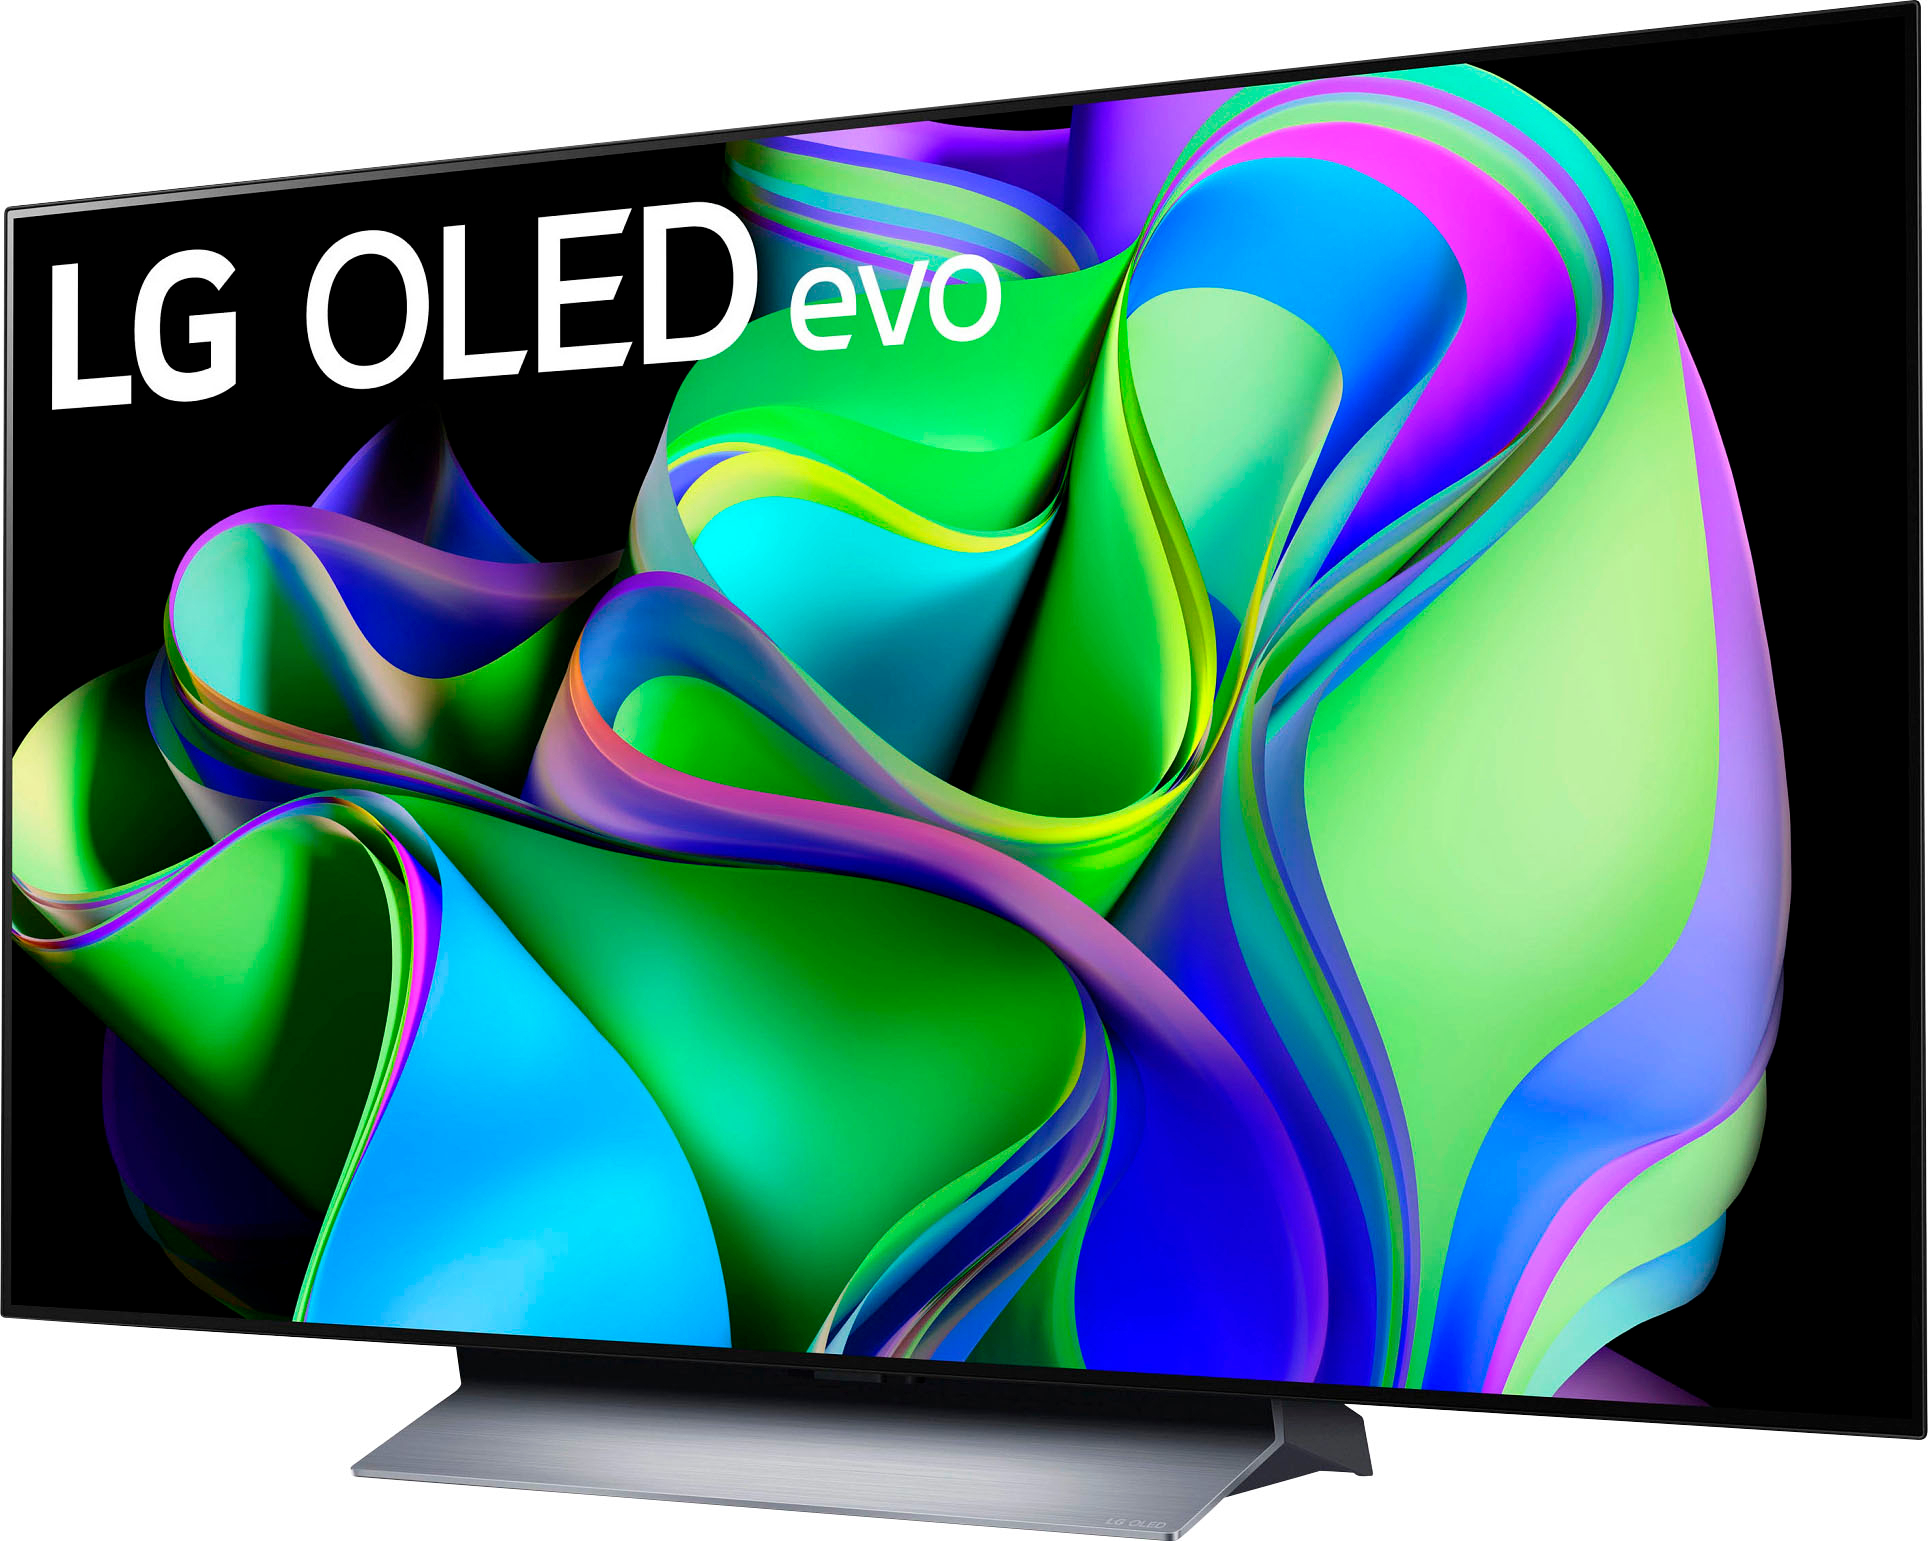 LG C3 OLED review: still at the top of the TV game?